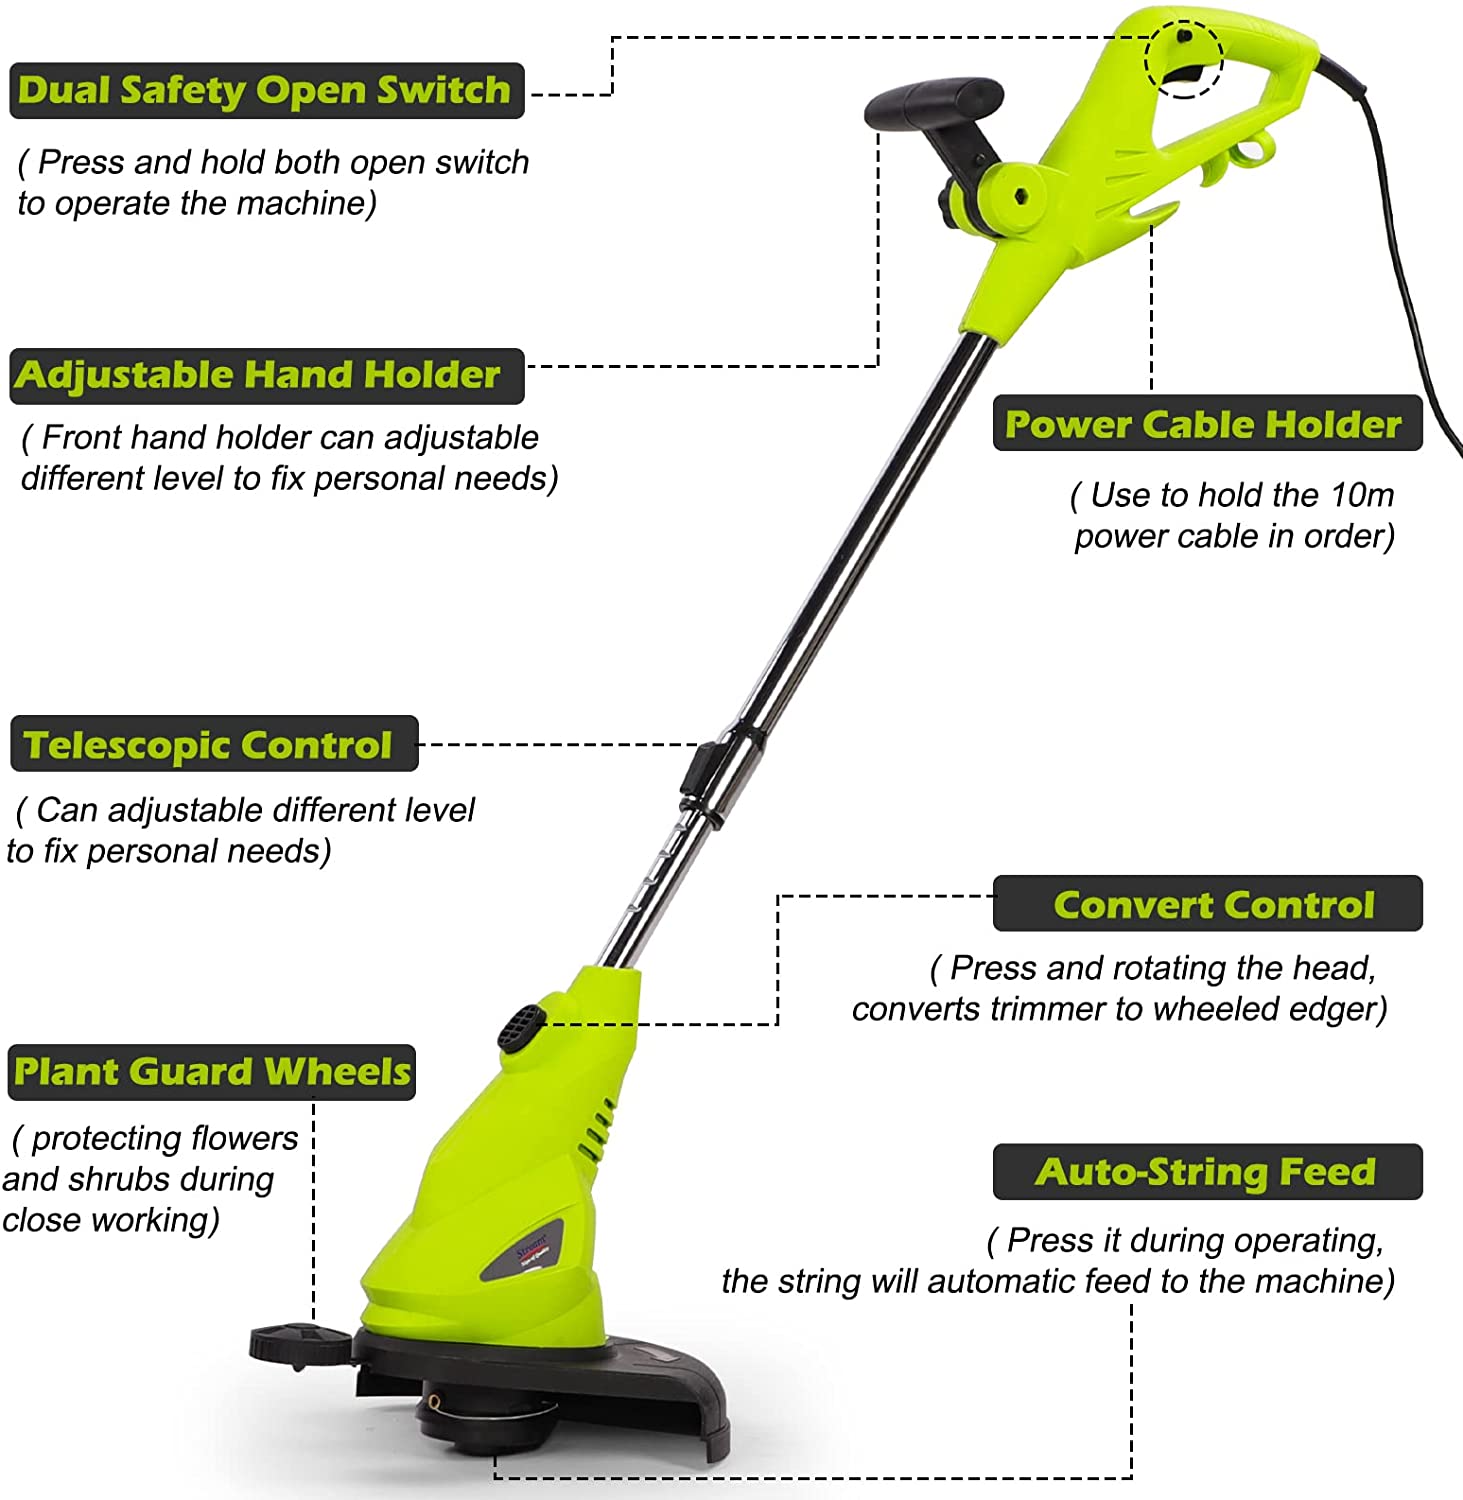 String Grass Trimmer, Stream Electric Strimmer, Weed and Yard